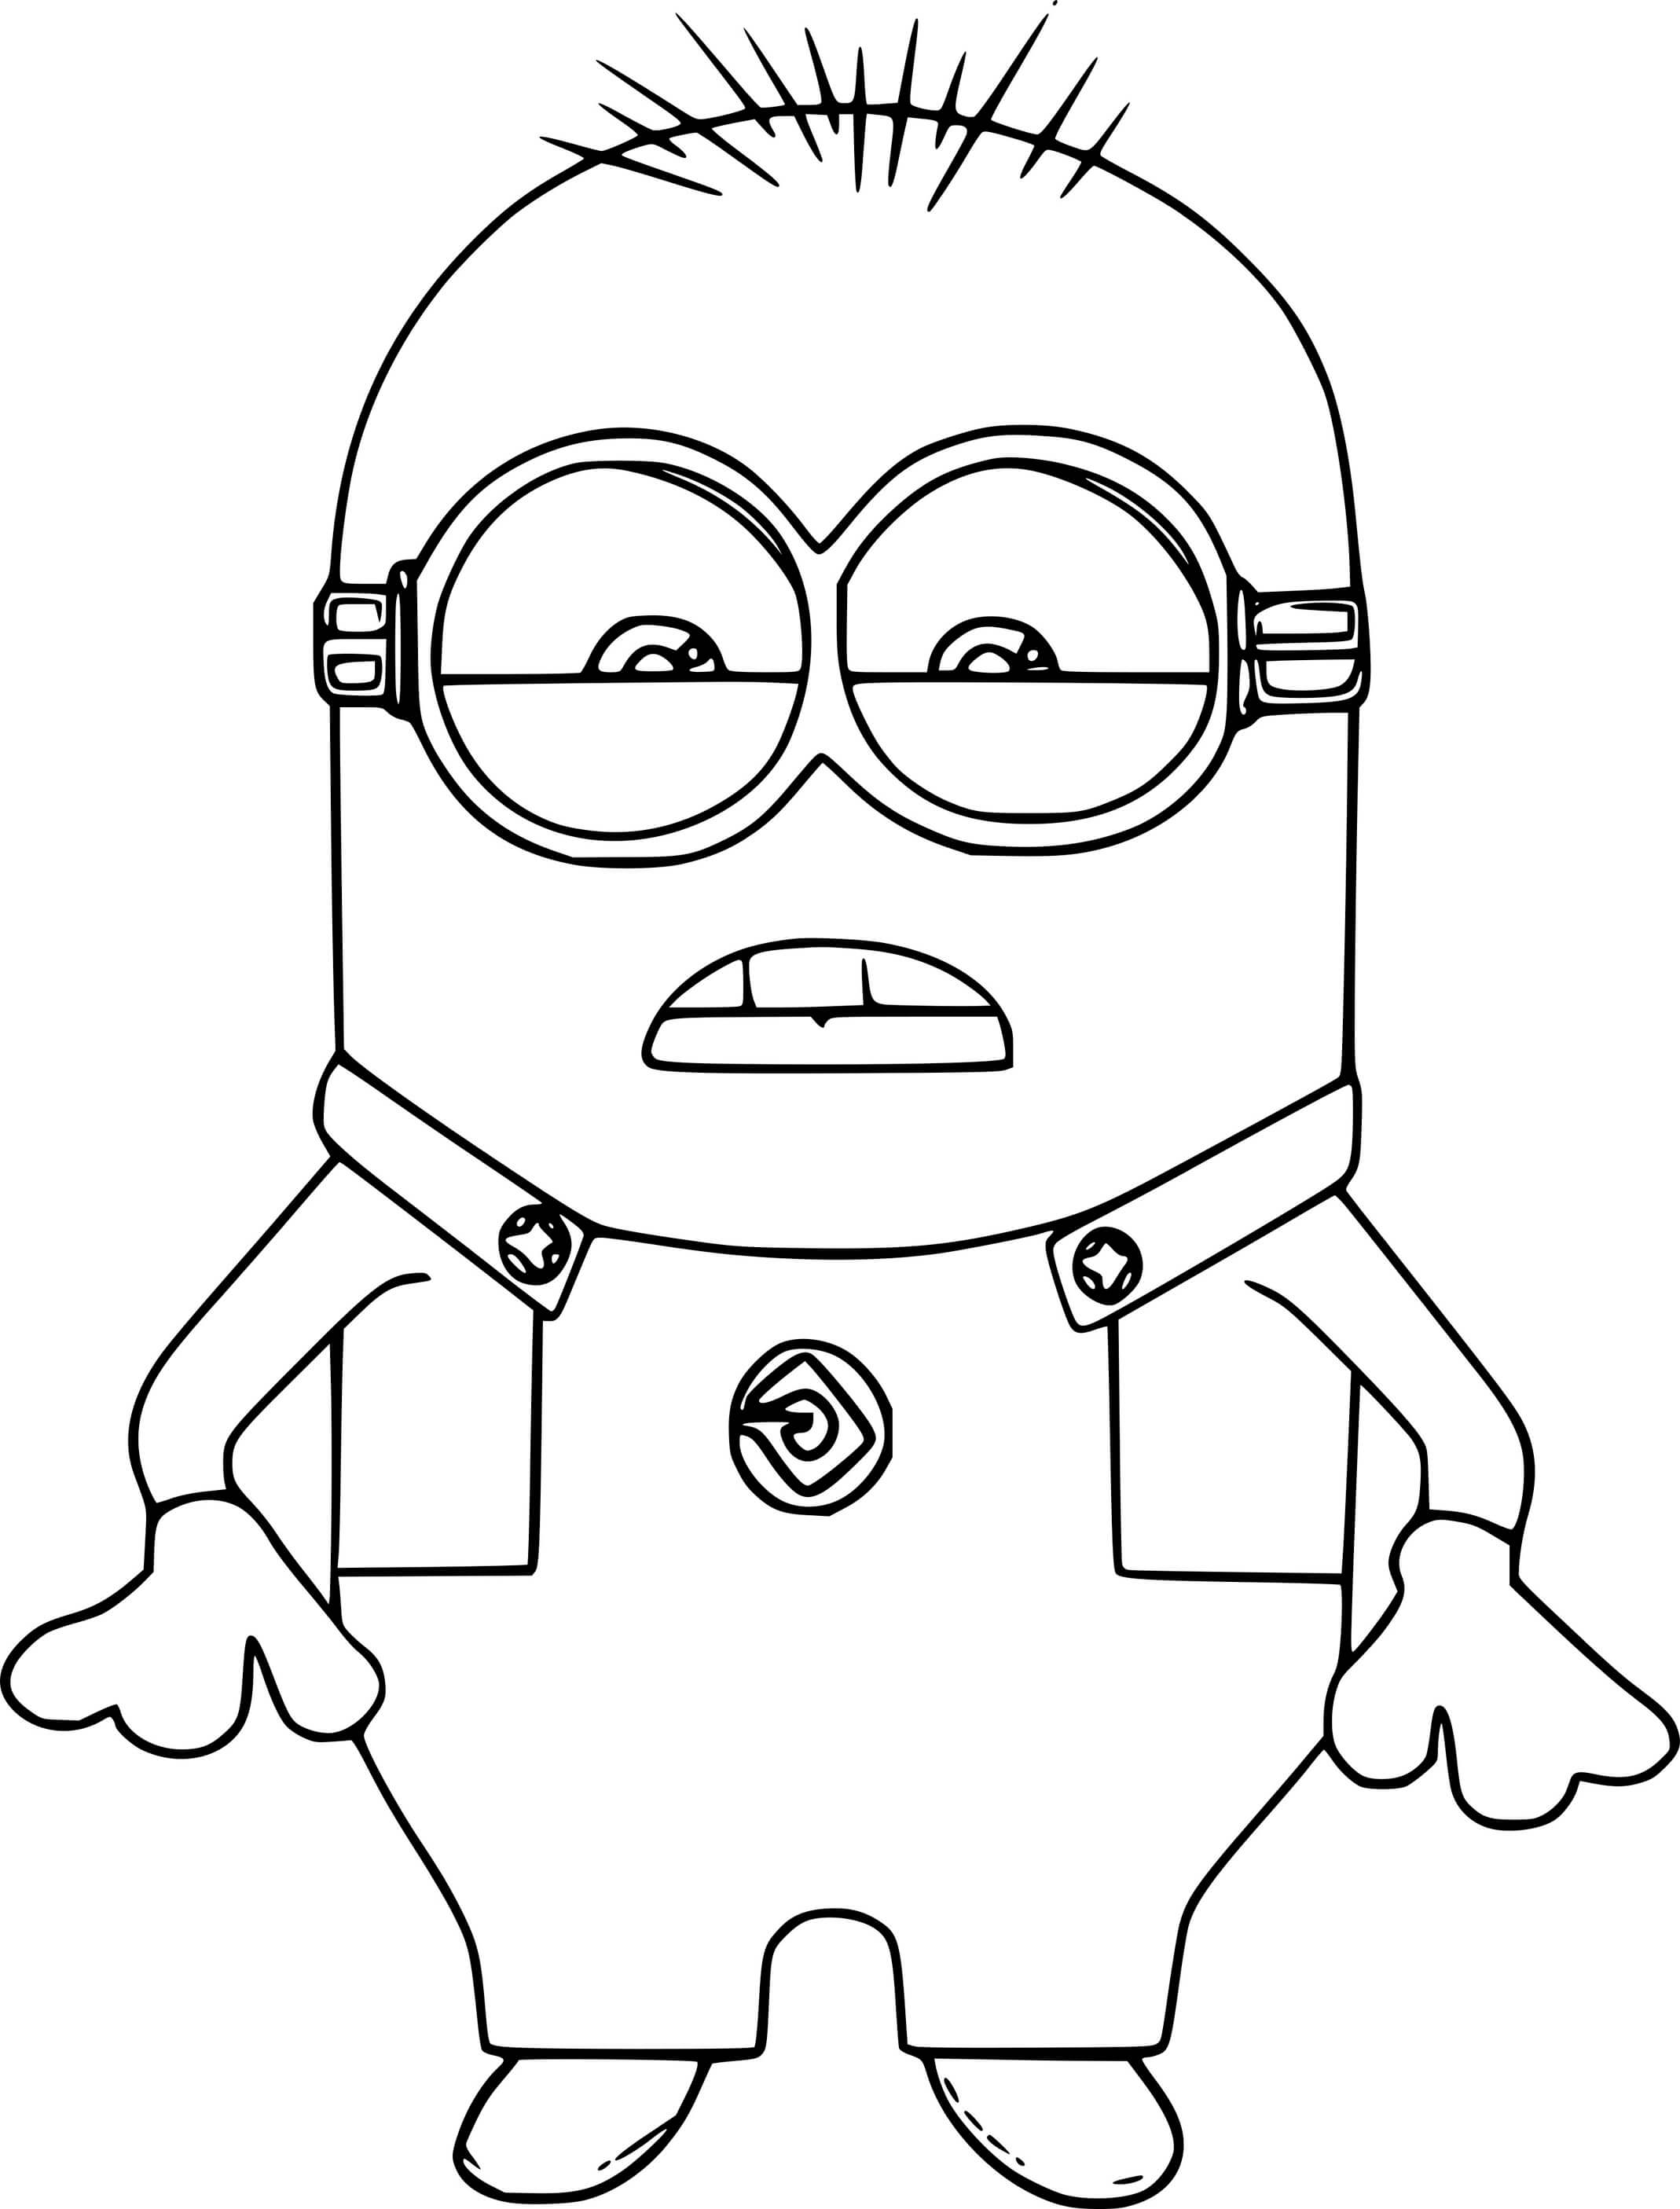 Jerry Minion Coloring Page